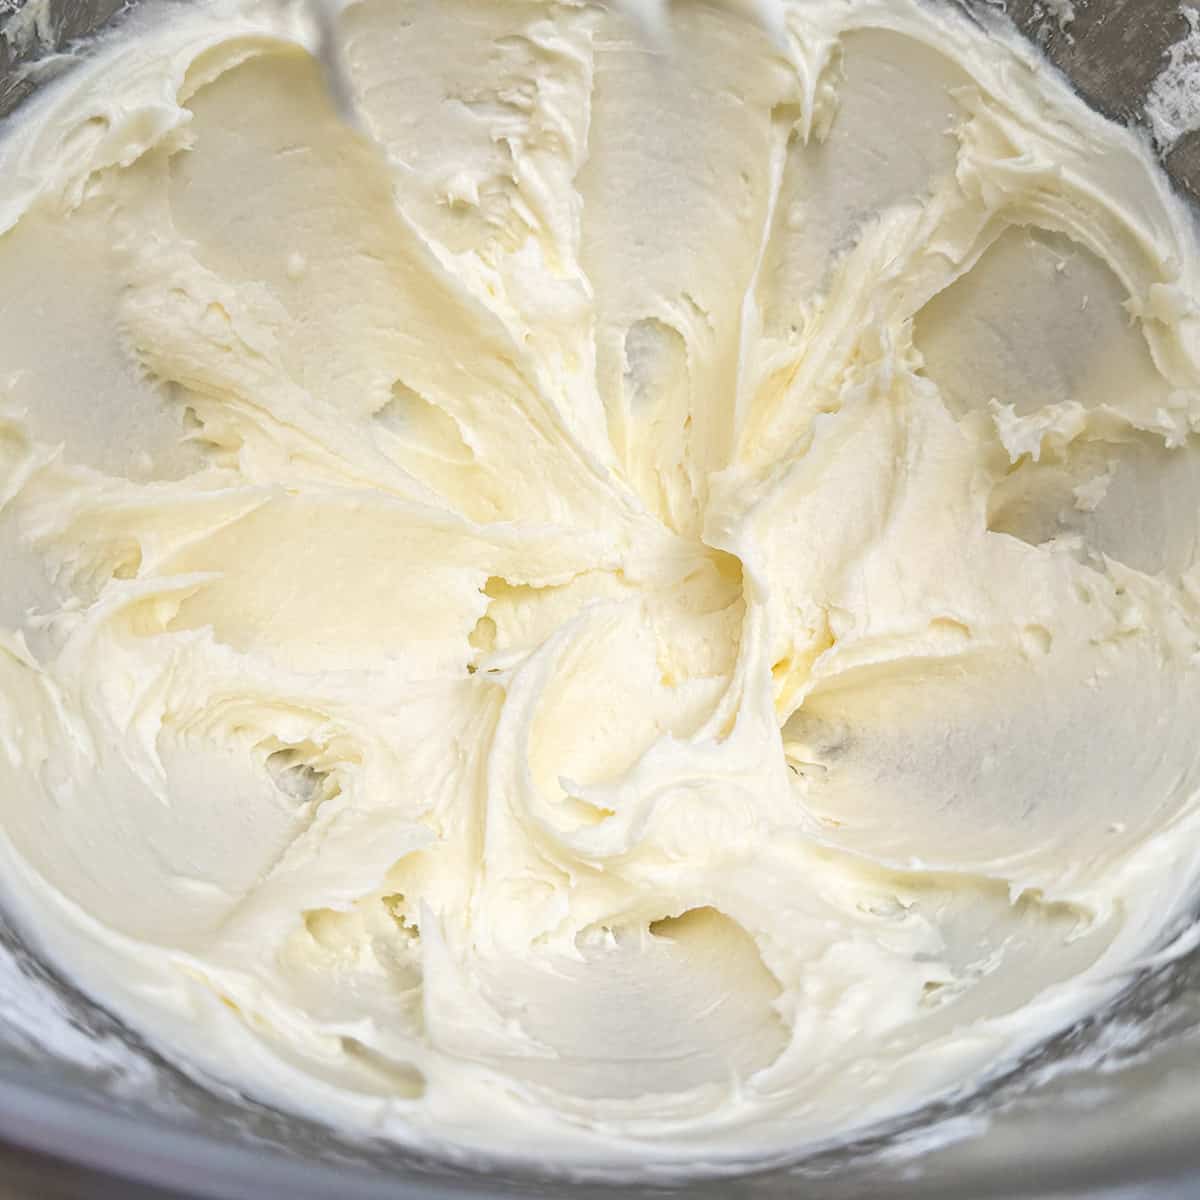 Soft peaks of butter-sugar after being mixed for 3 minutes.